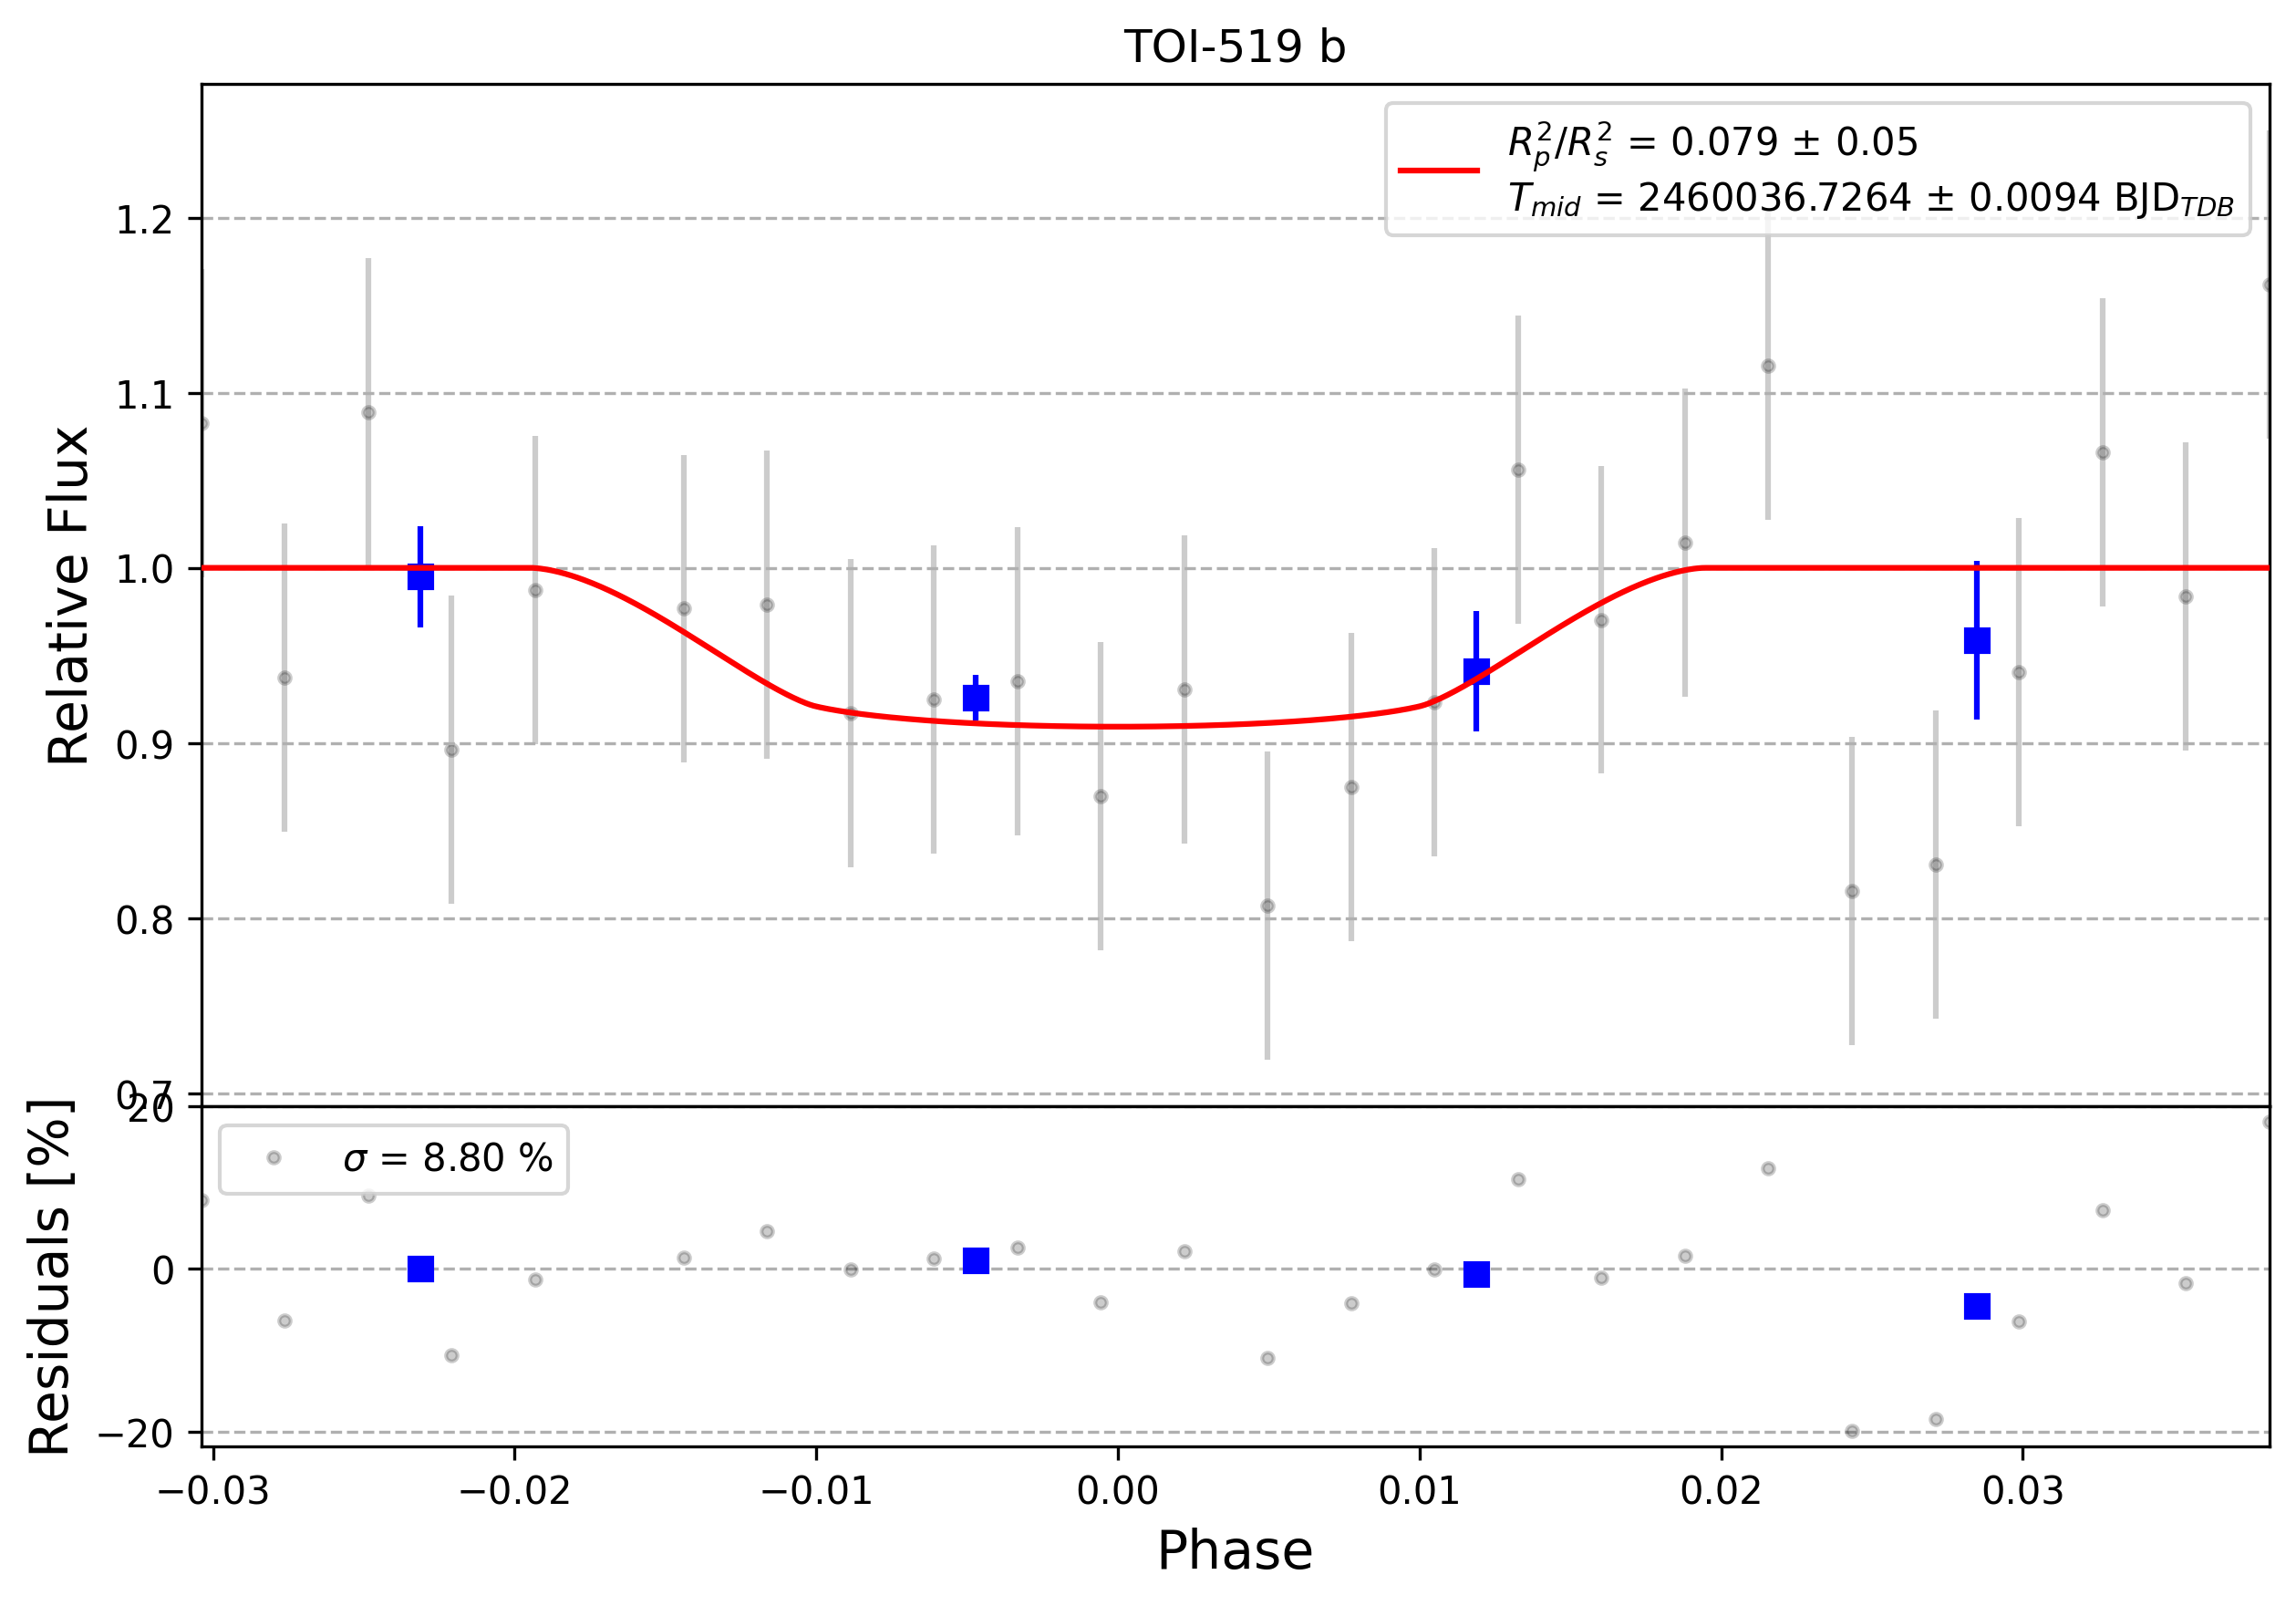 Light curve chart for 0003102